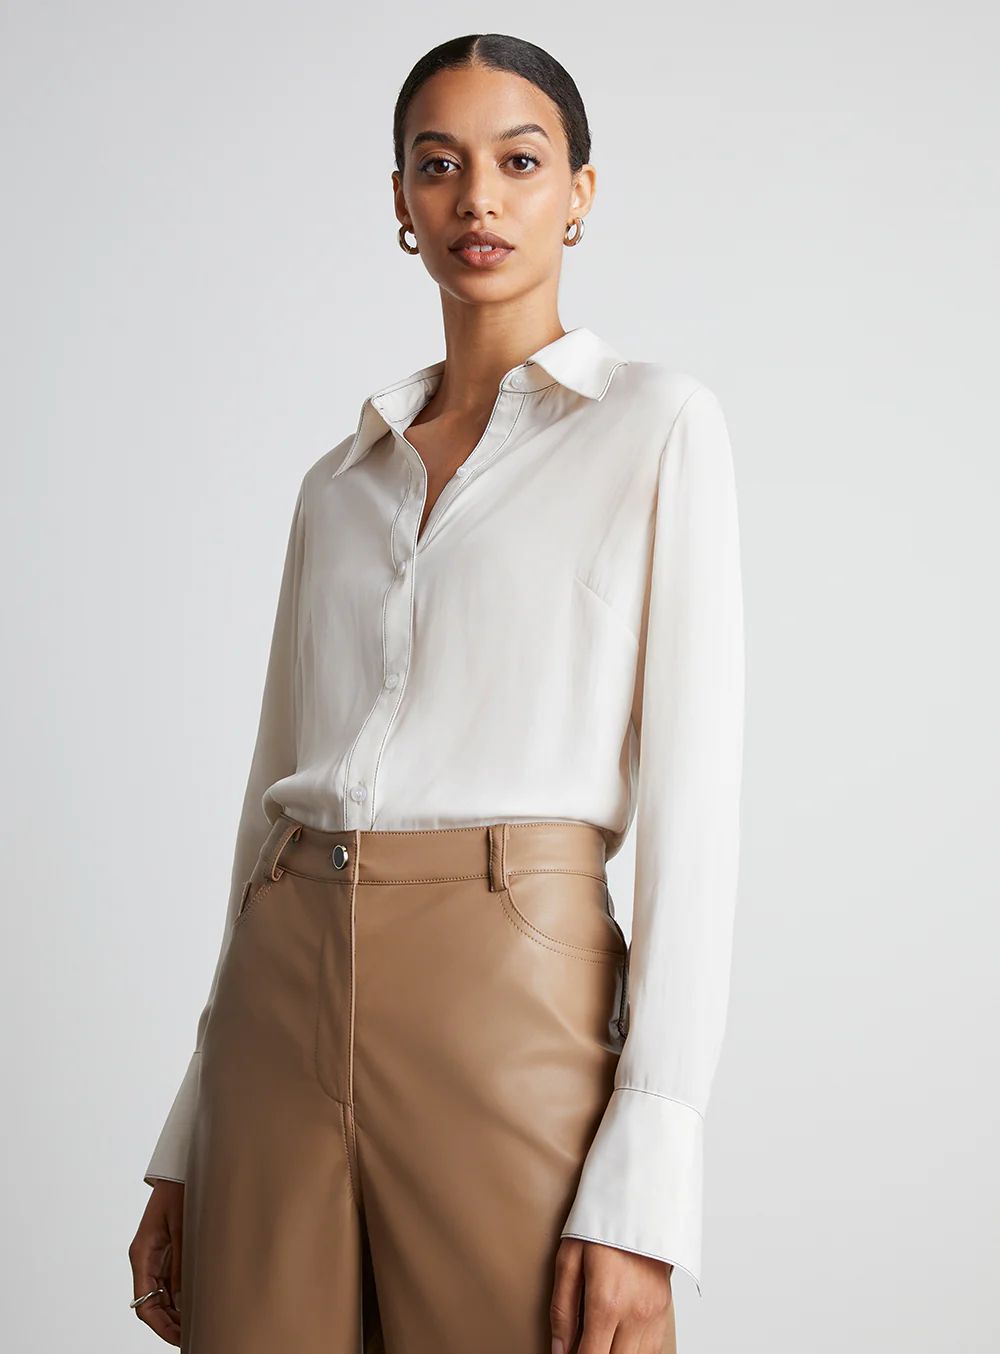 Sade Button-Down Collared Shirt | Who What Wear Collection